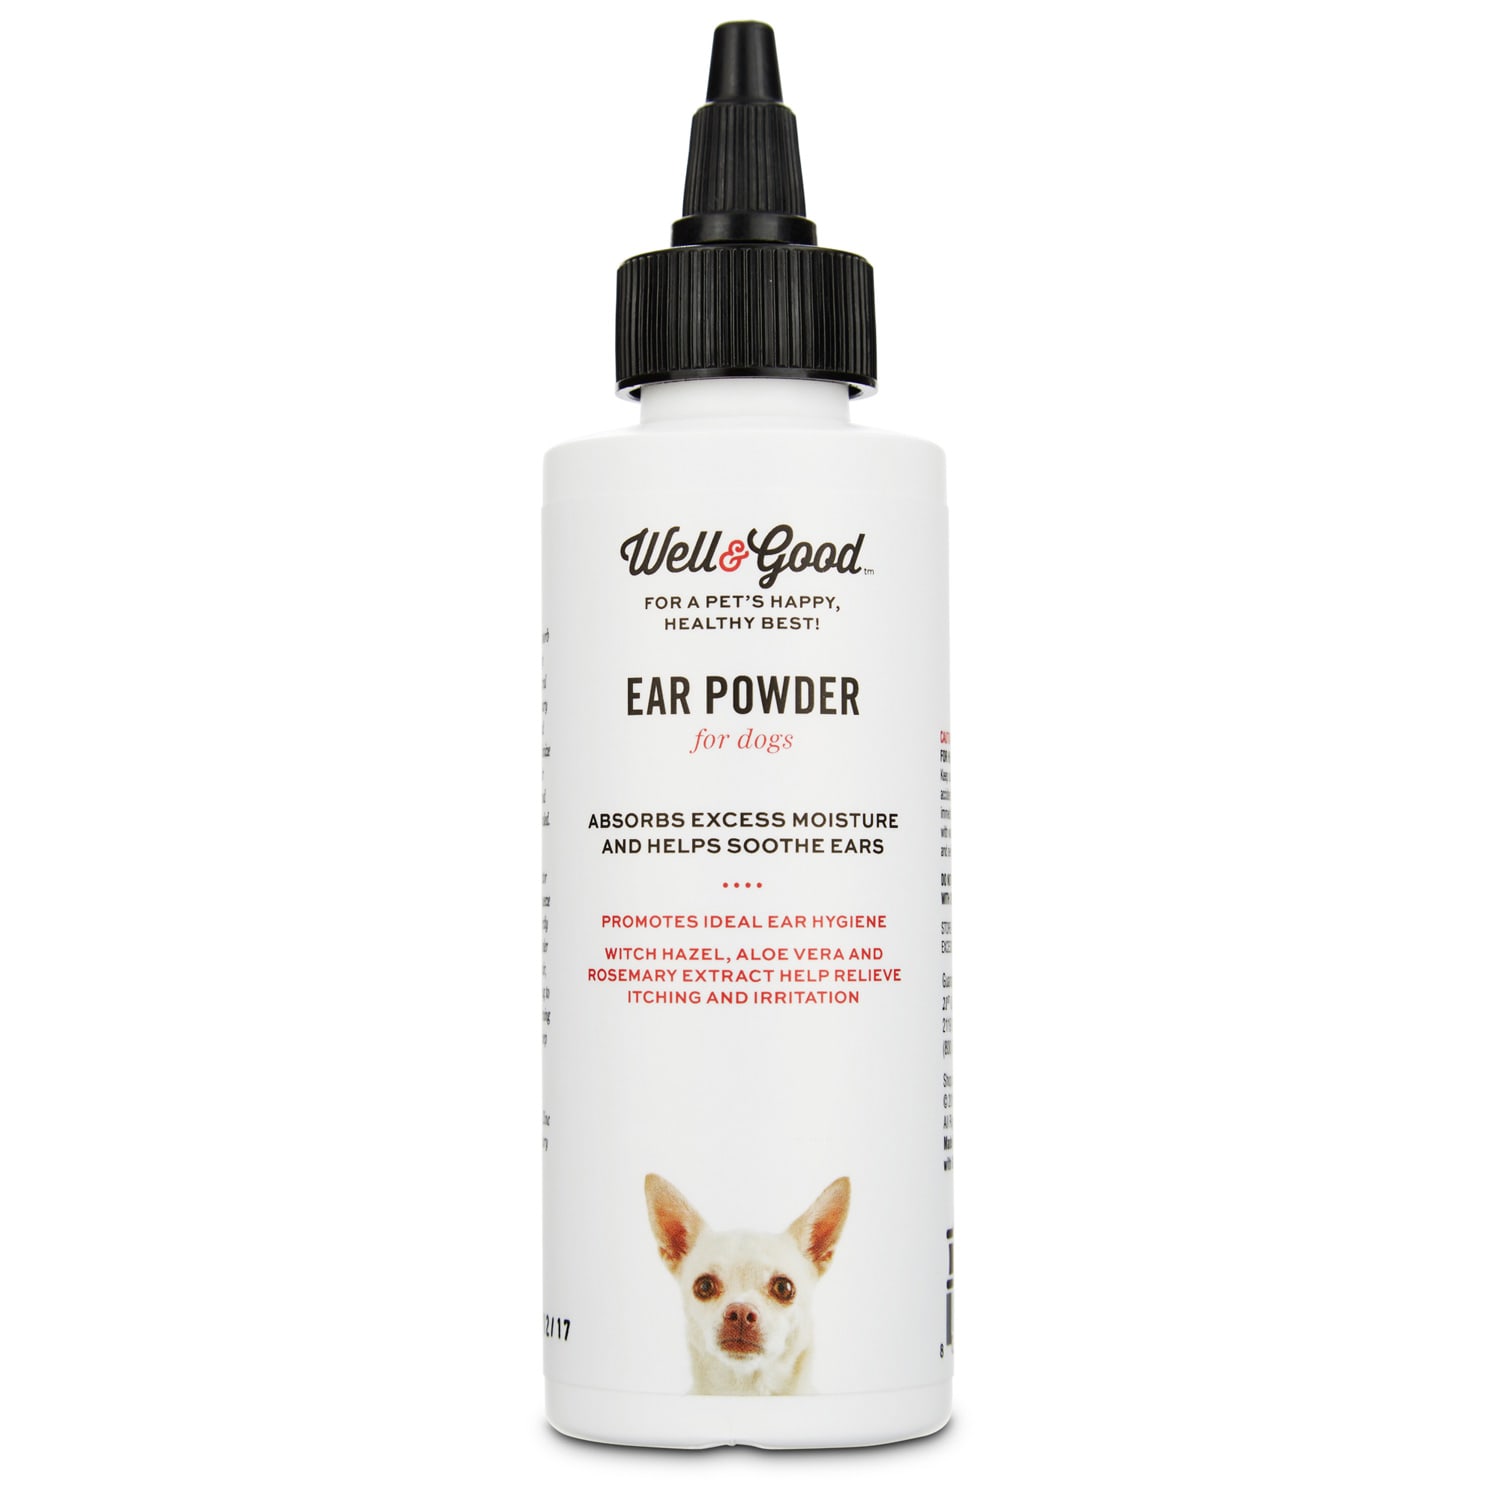 ear mite treatment for dogs petsmart